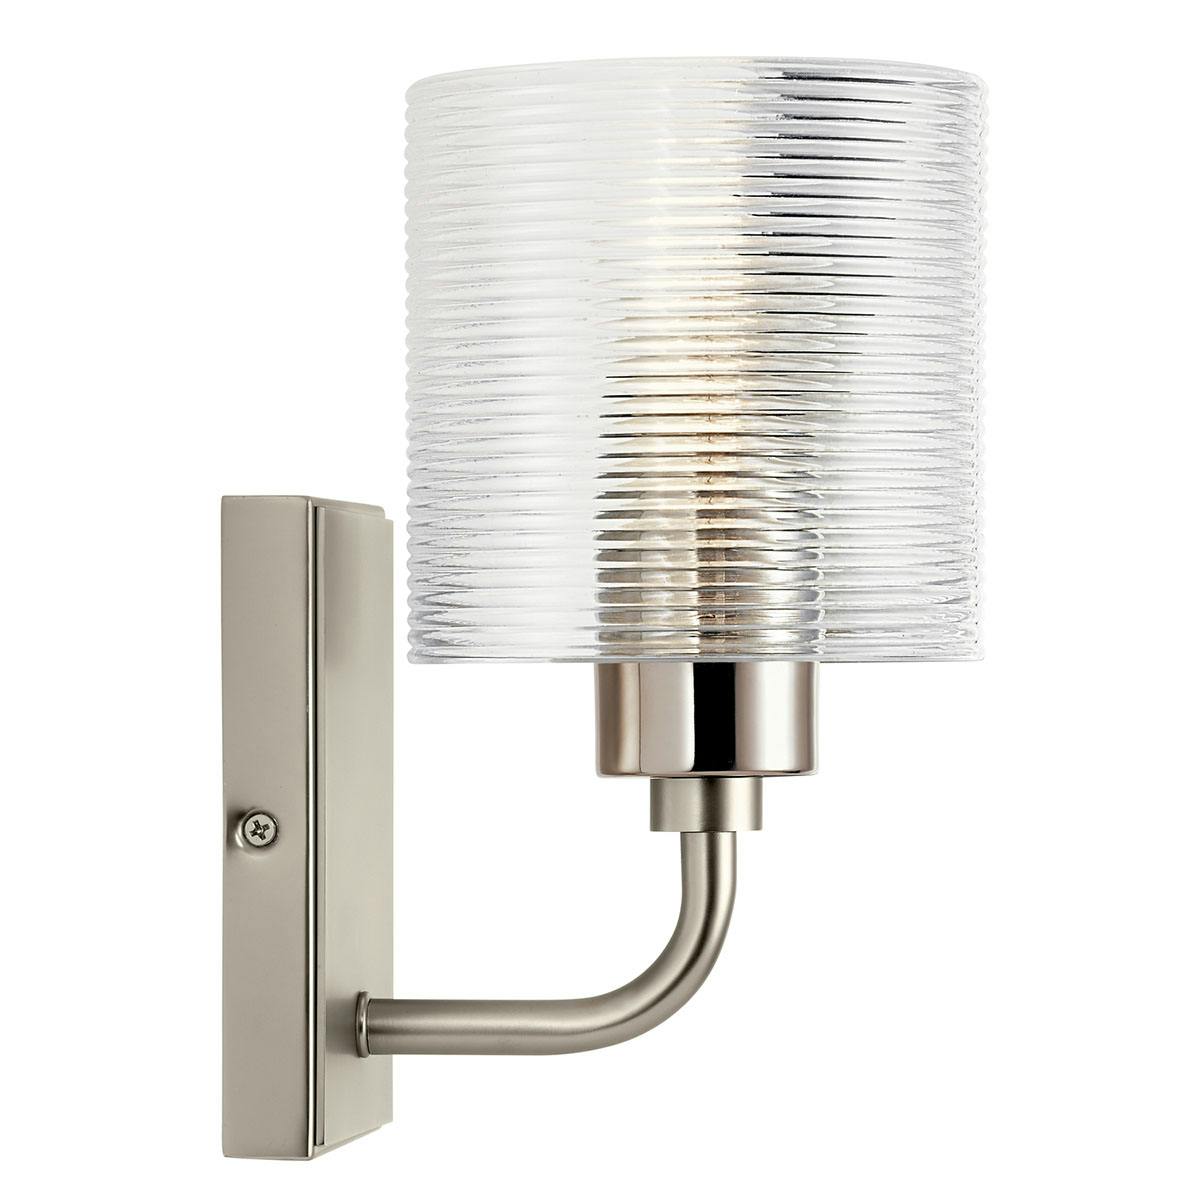 Profile view of the Harvan 9.25" 1 Light Sconce Nickel on a white background